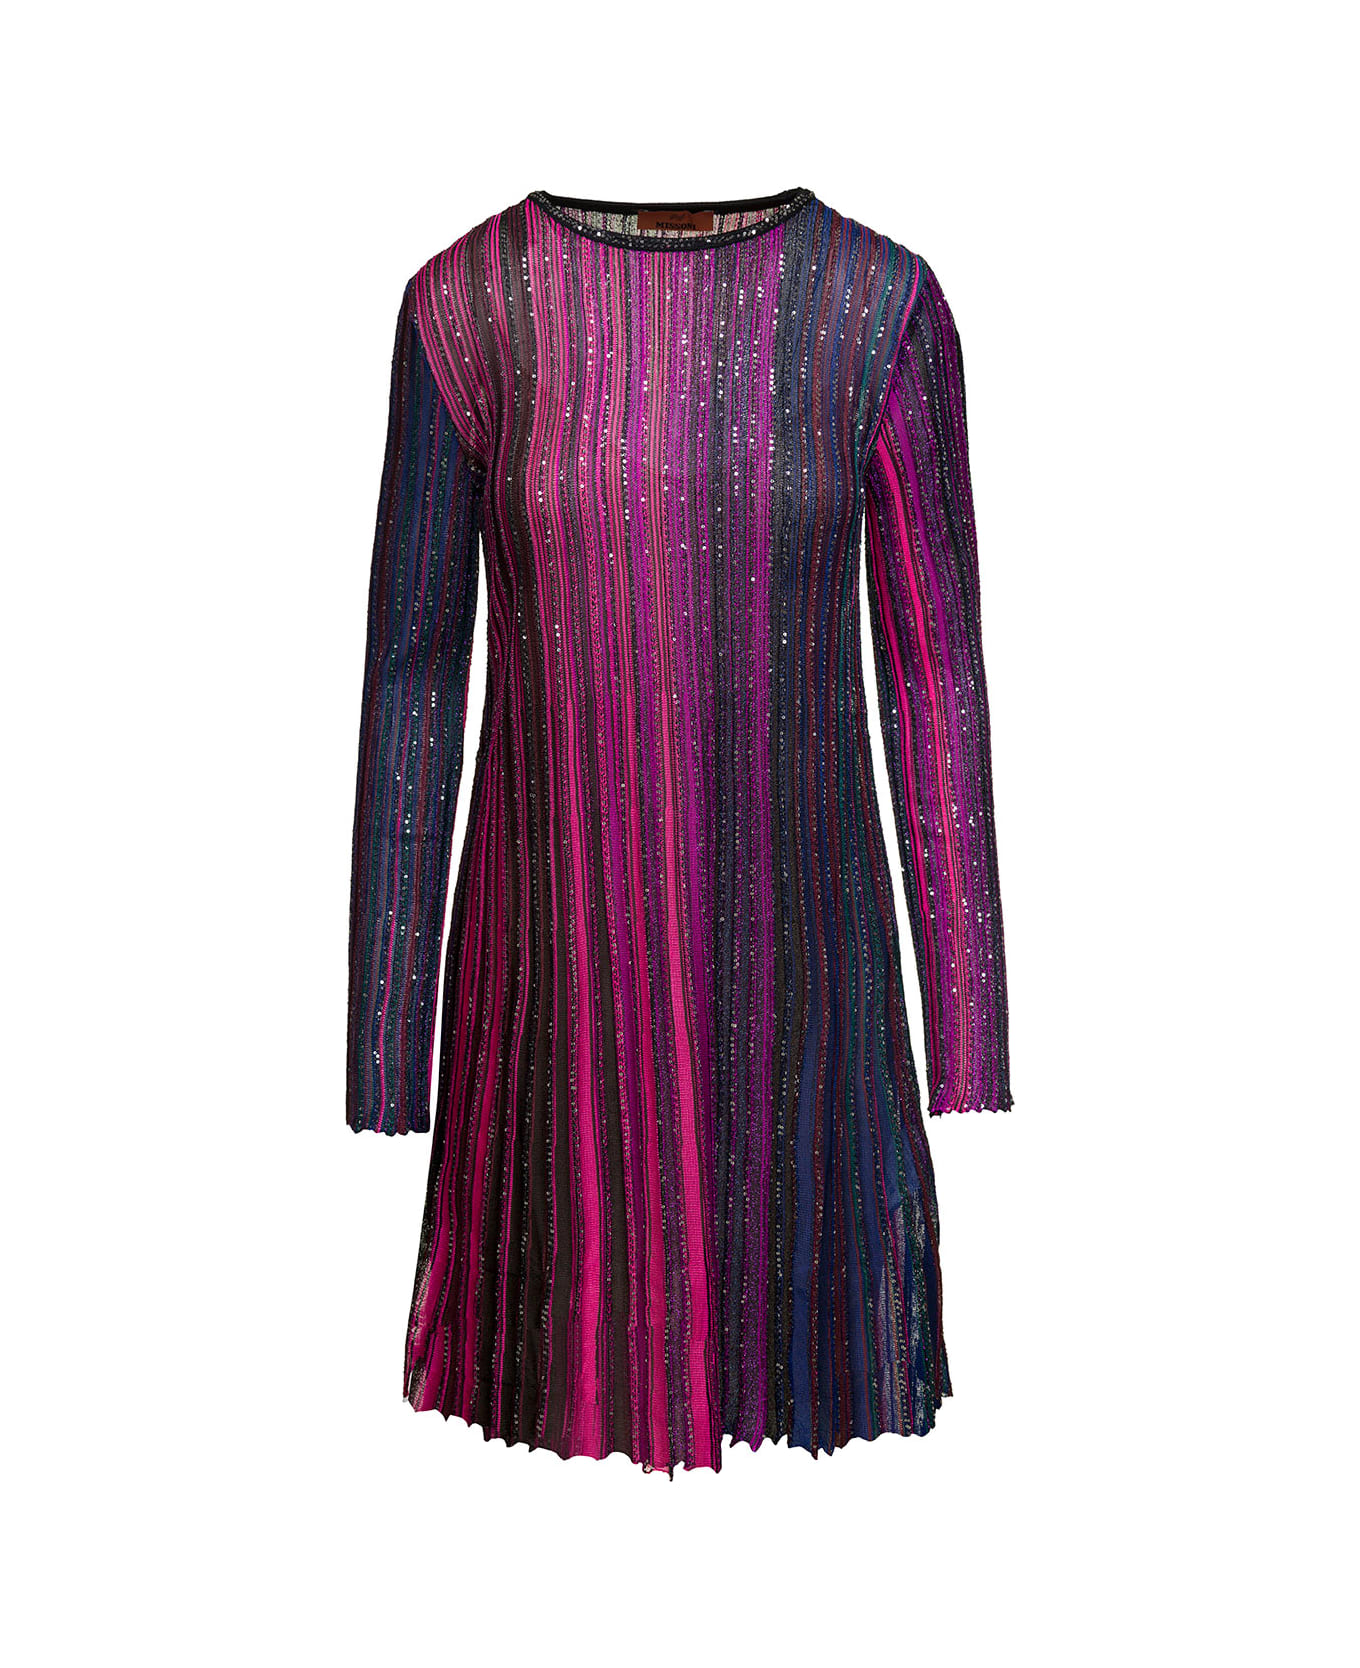 Missoni Multicolor Partialized Knit With Sequin Long Sleeves Mini Dress - N Black Viole